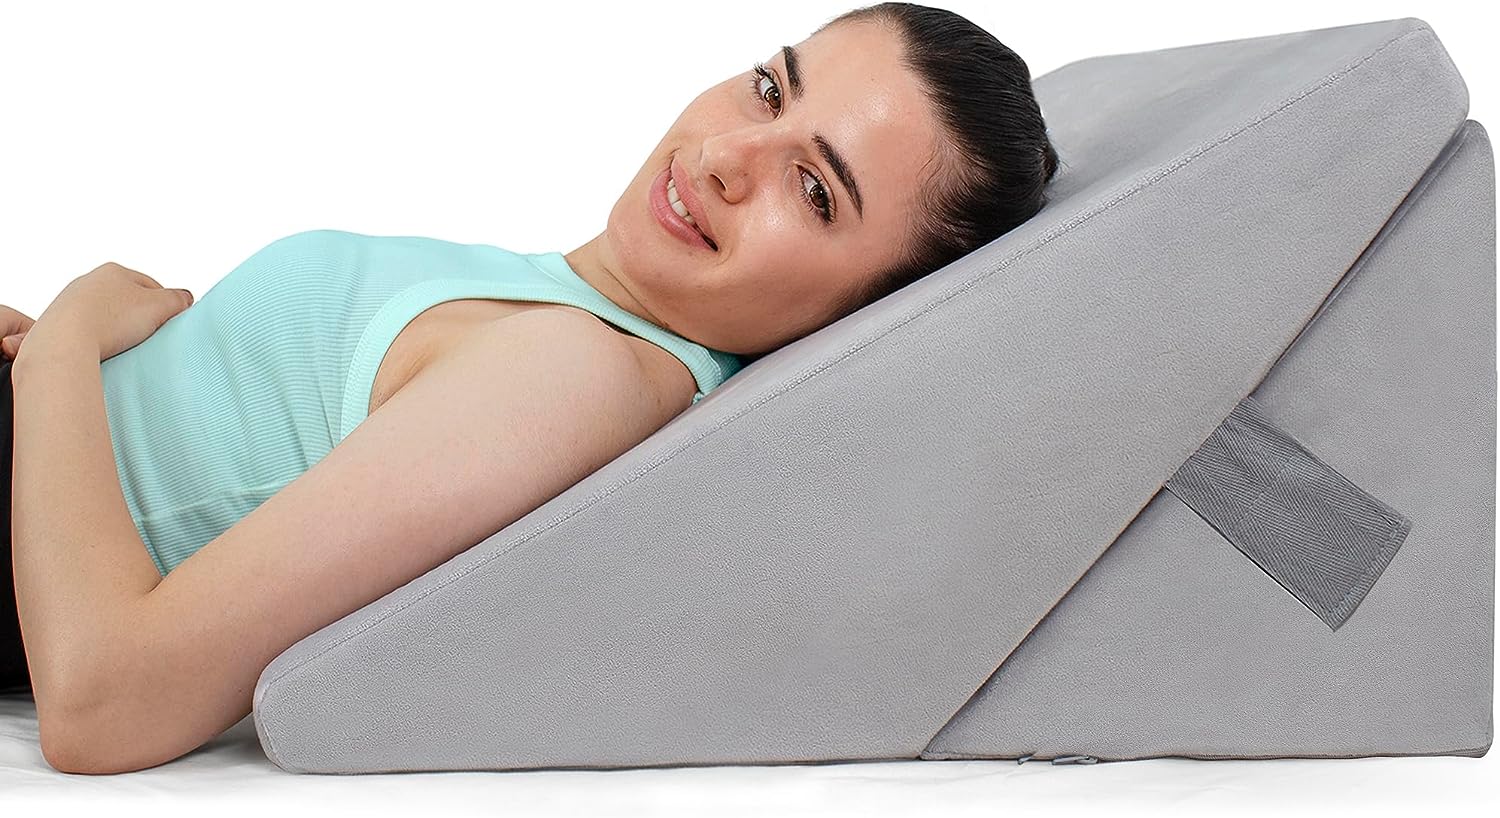 Flexicomfort Memory Foam Wedge Pillow for Sleeping with Adjustable Head  Support Cushion - Post Surgery Pillow - Folding Incline Cushion System for  Legs - Washable Cover